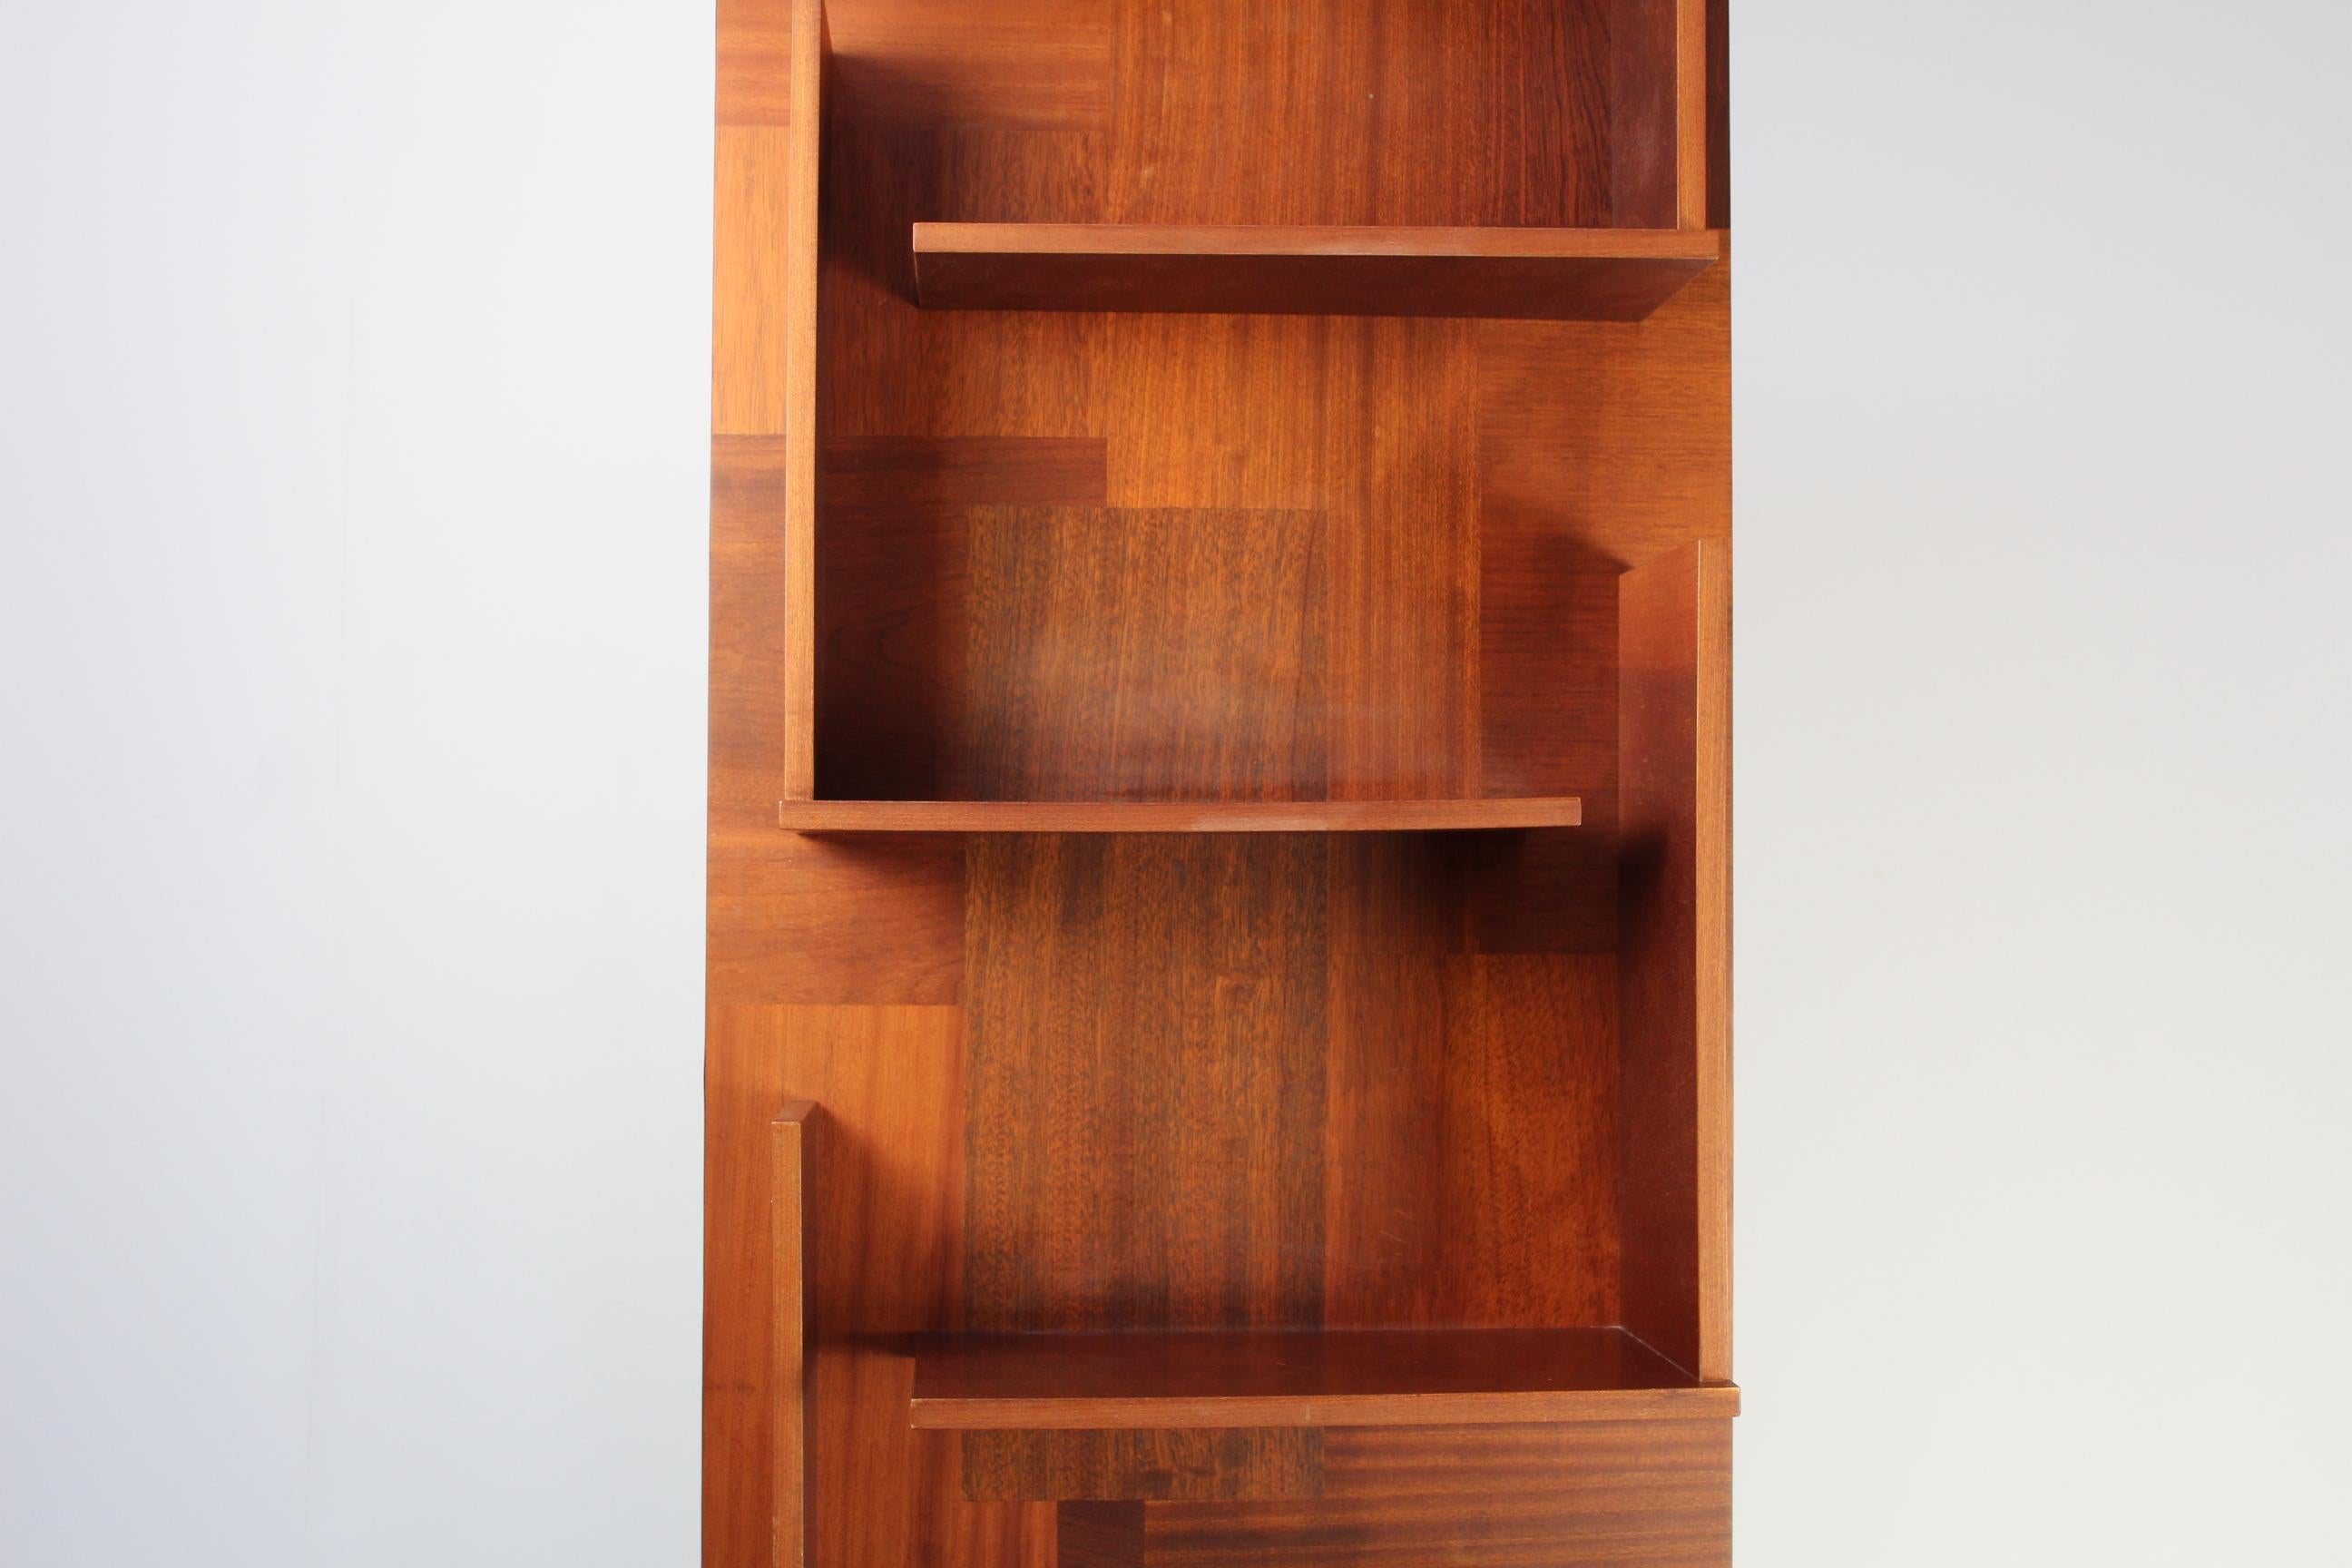 Harlem Inlaid Solid Wood Bookcase with Metal Silver Hook In New Condition For Sale In Lentate sul Seveso, Monza e Brianza